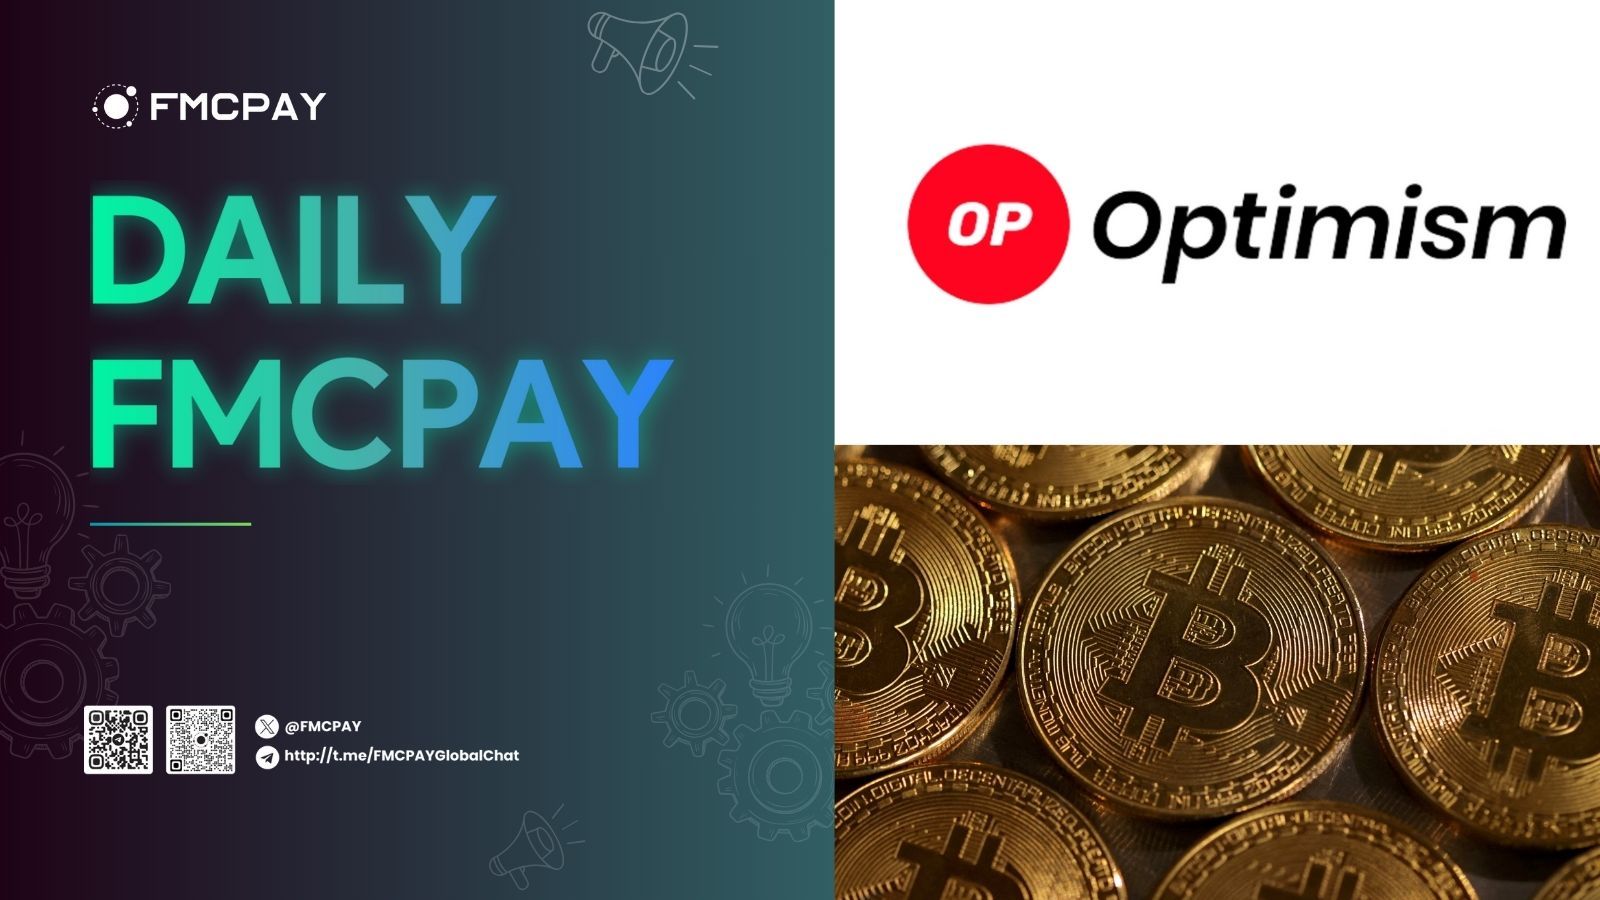 fmcpay a16z buys 90m of optimisms op token in private deal